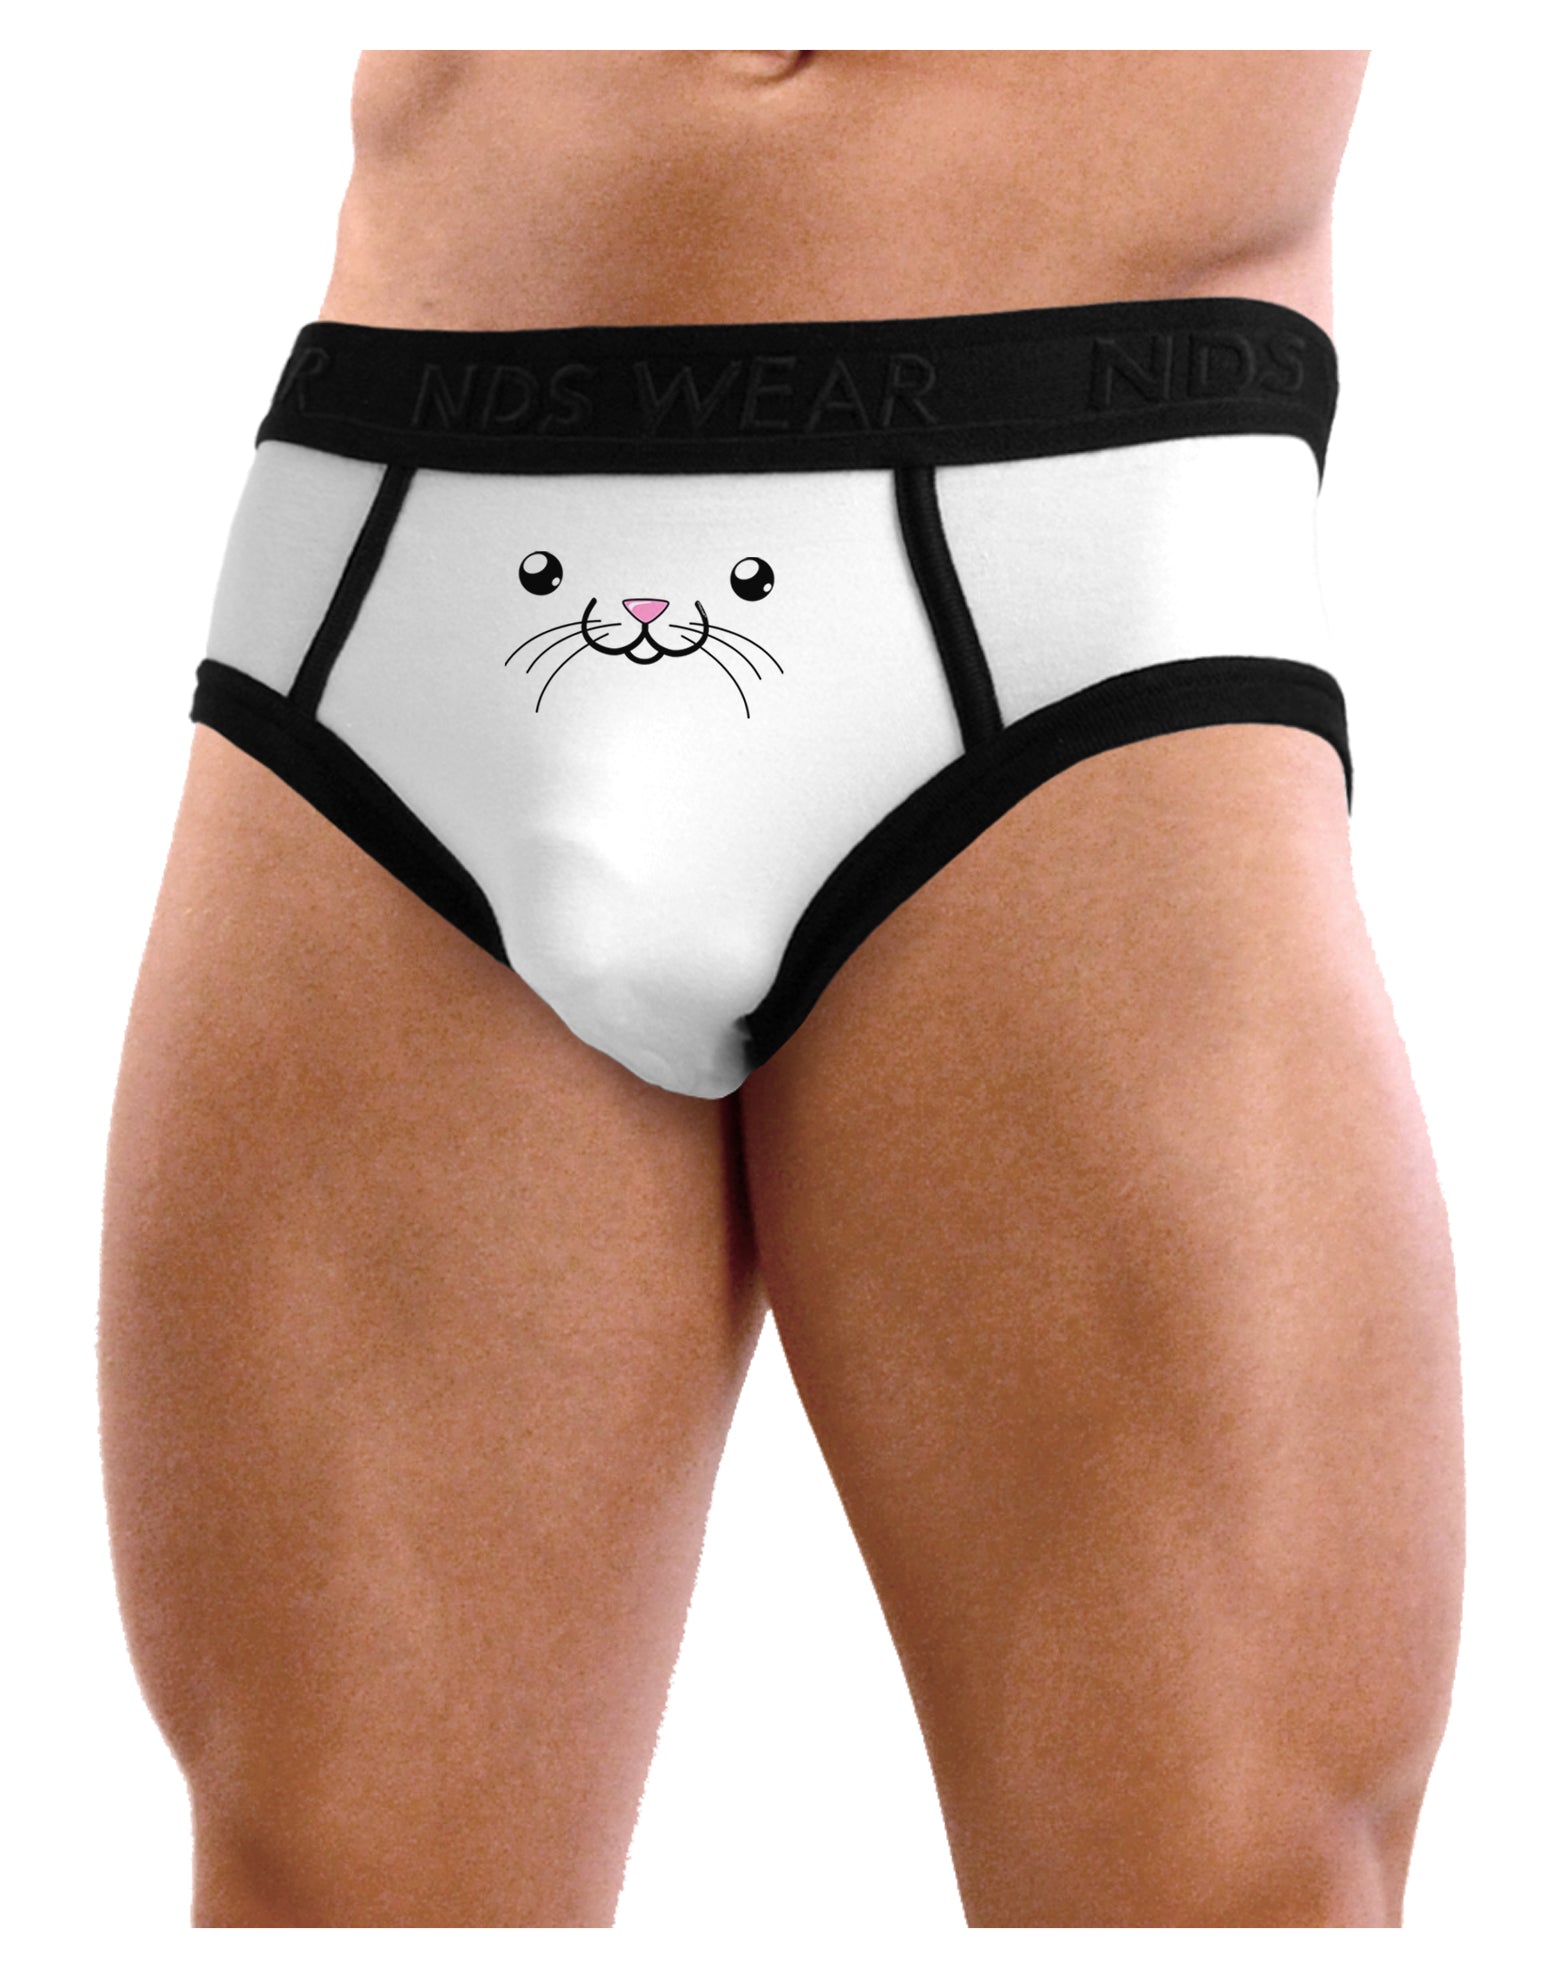 Kyu-T Face - Tiny the Mouse Mens NDS Wear Briefs Underwear